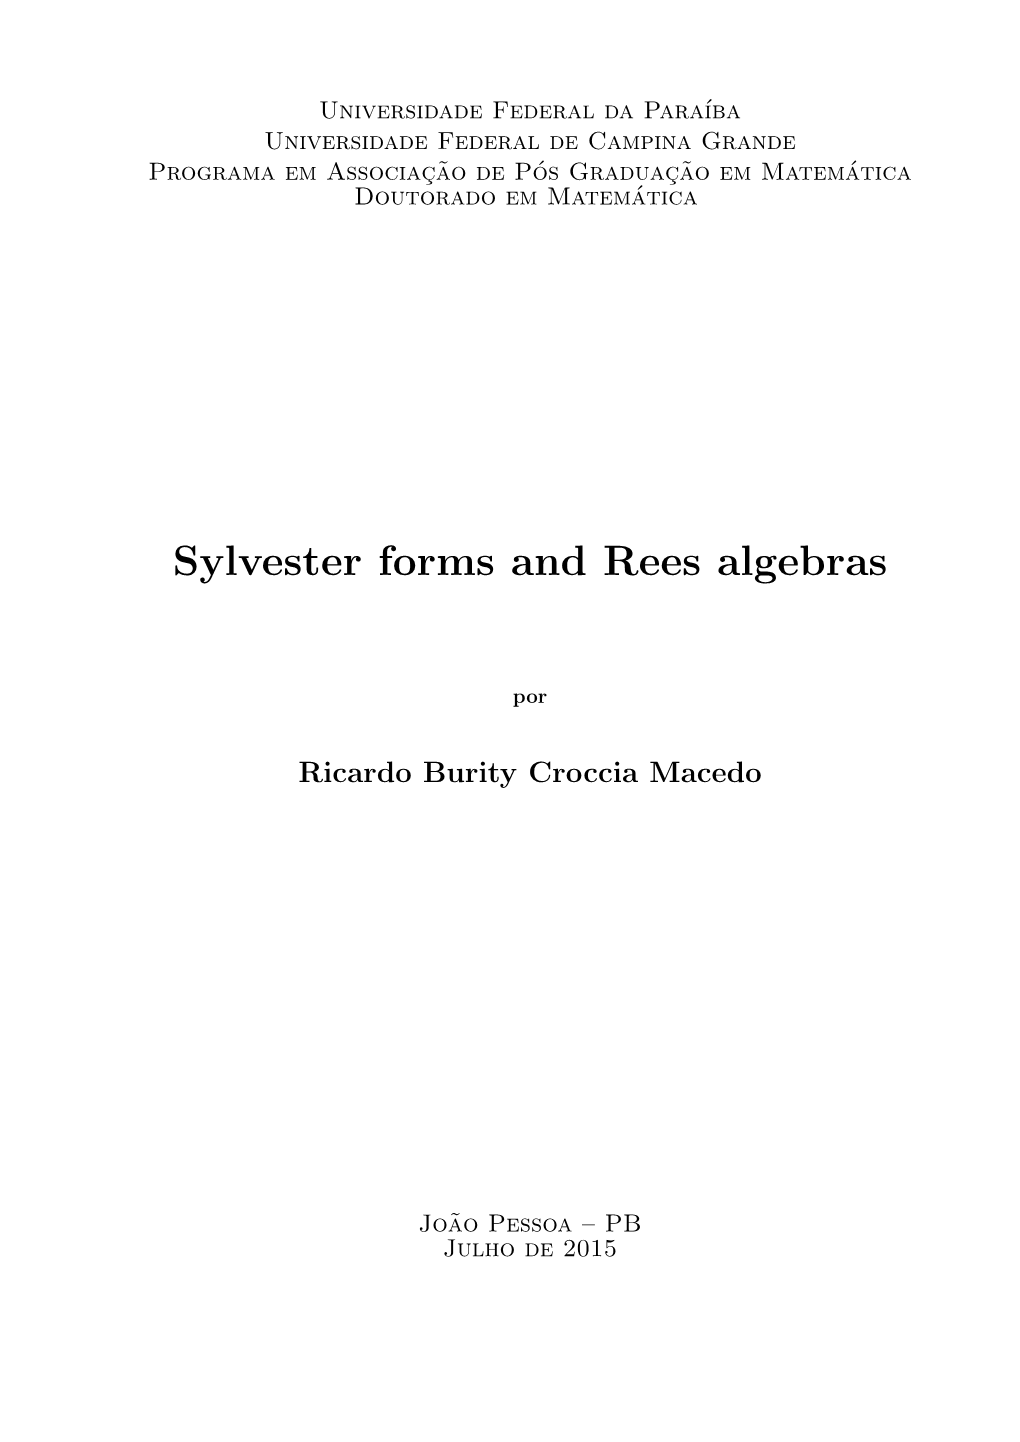 Sylvester Forms and Rees Algebras